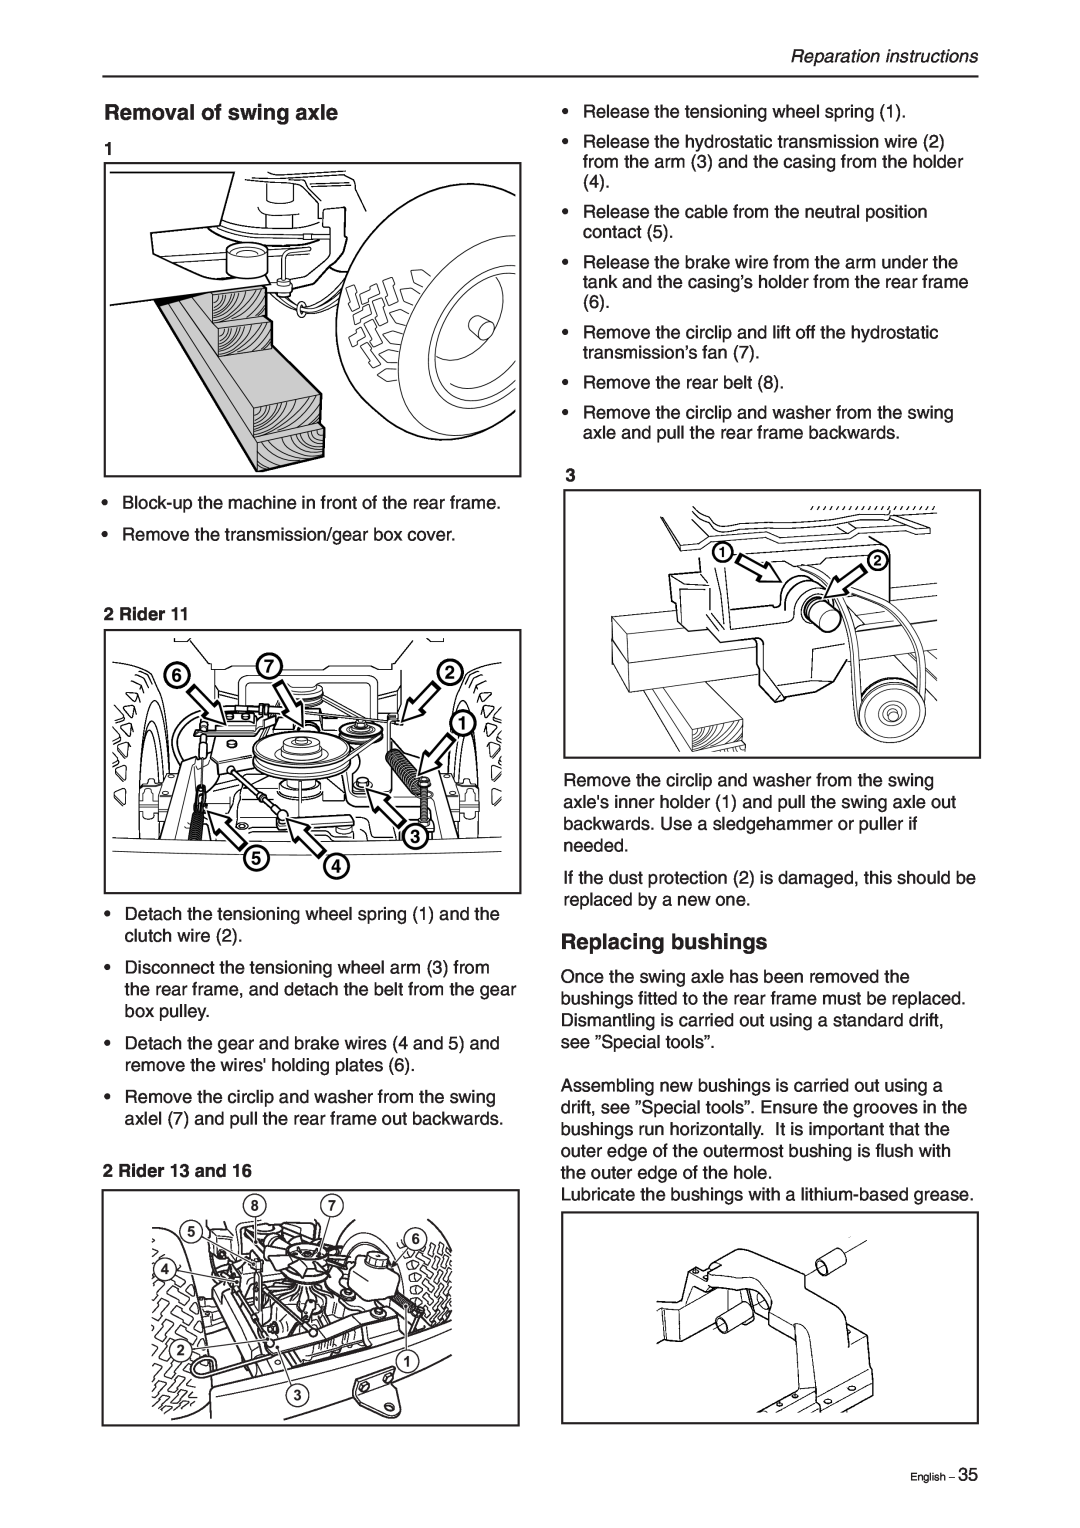 Briggs & Stratton RIDER 16, RIDER 11 manual Removal of swing axle, Replacing bushings, Rider 13 and, Reparation instructions 